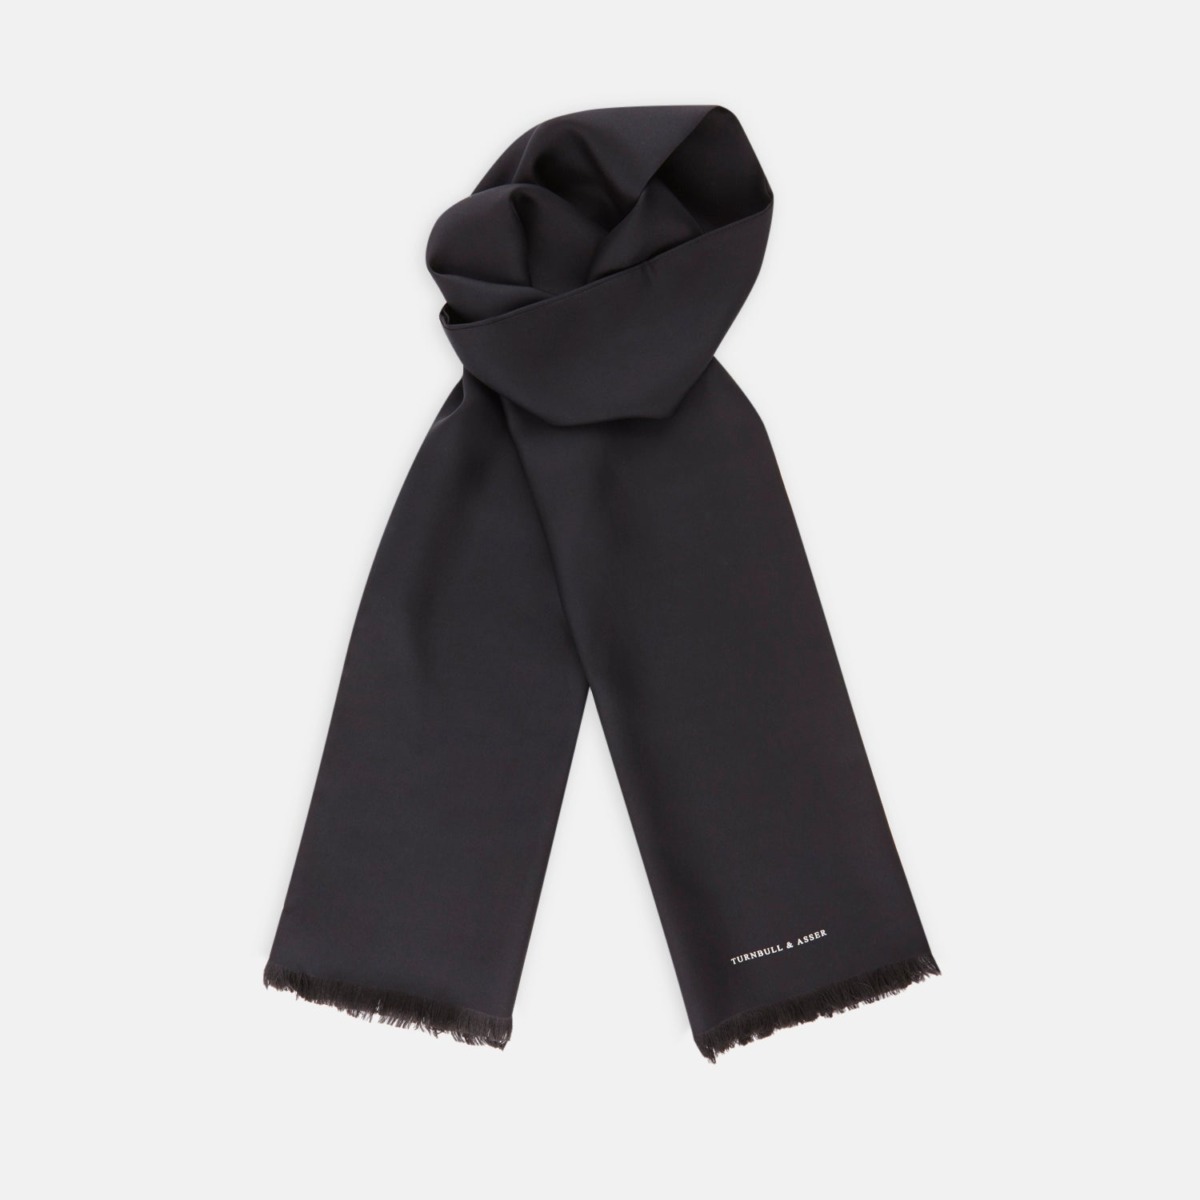 Gents Black Scarf by Turnbull And Asser GOOFASH